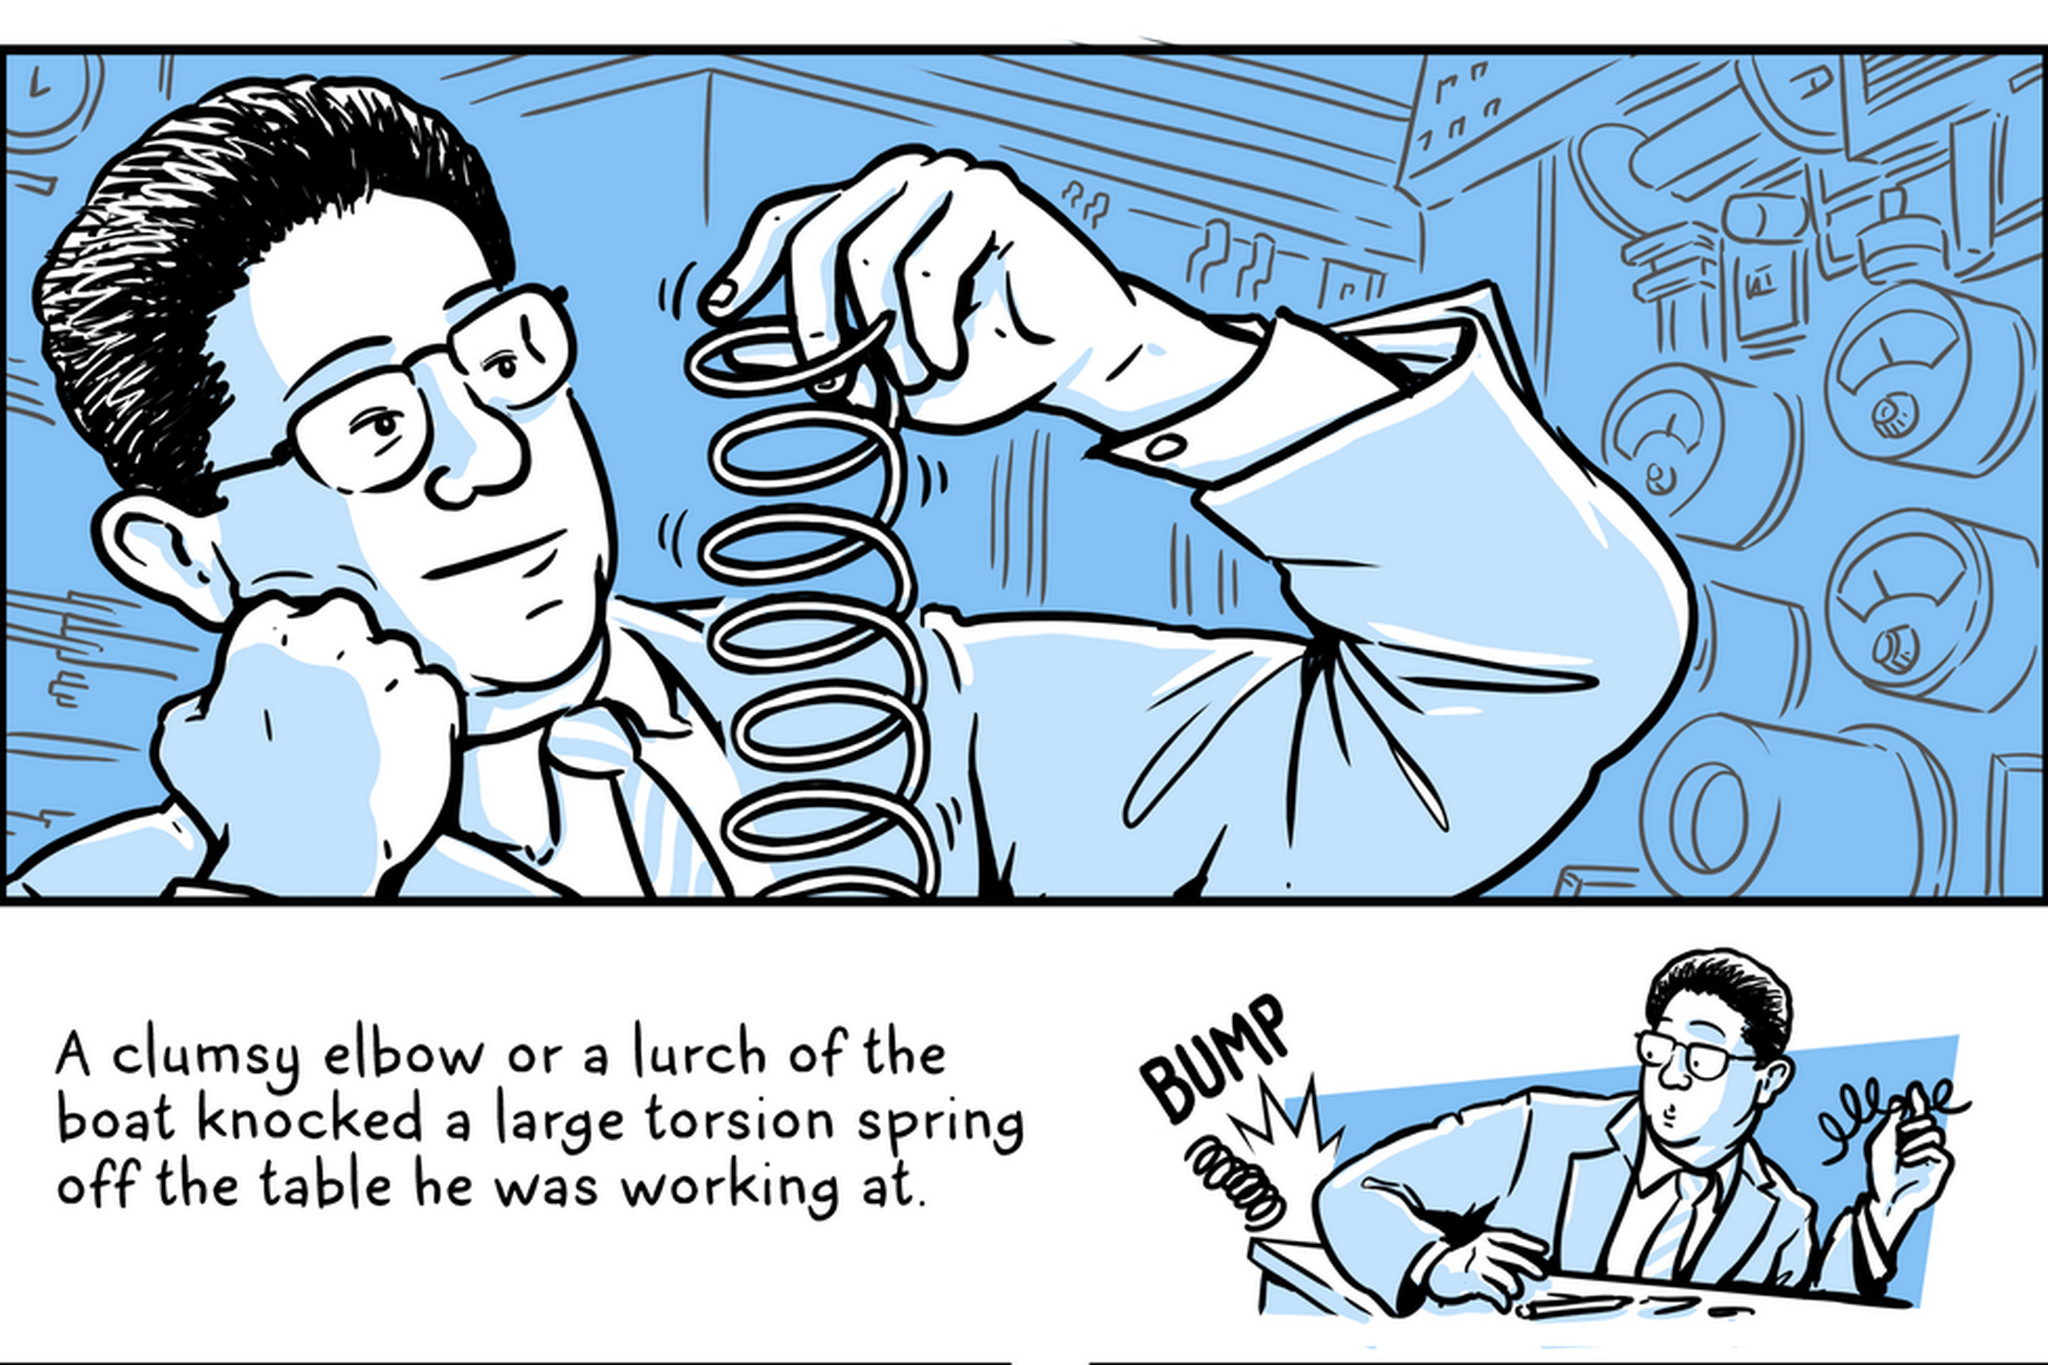 This Comic Explaining The Origin Of The Slinky Takes An Unexpected Turn